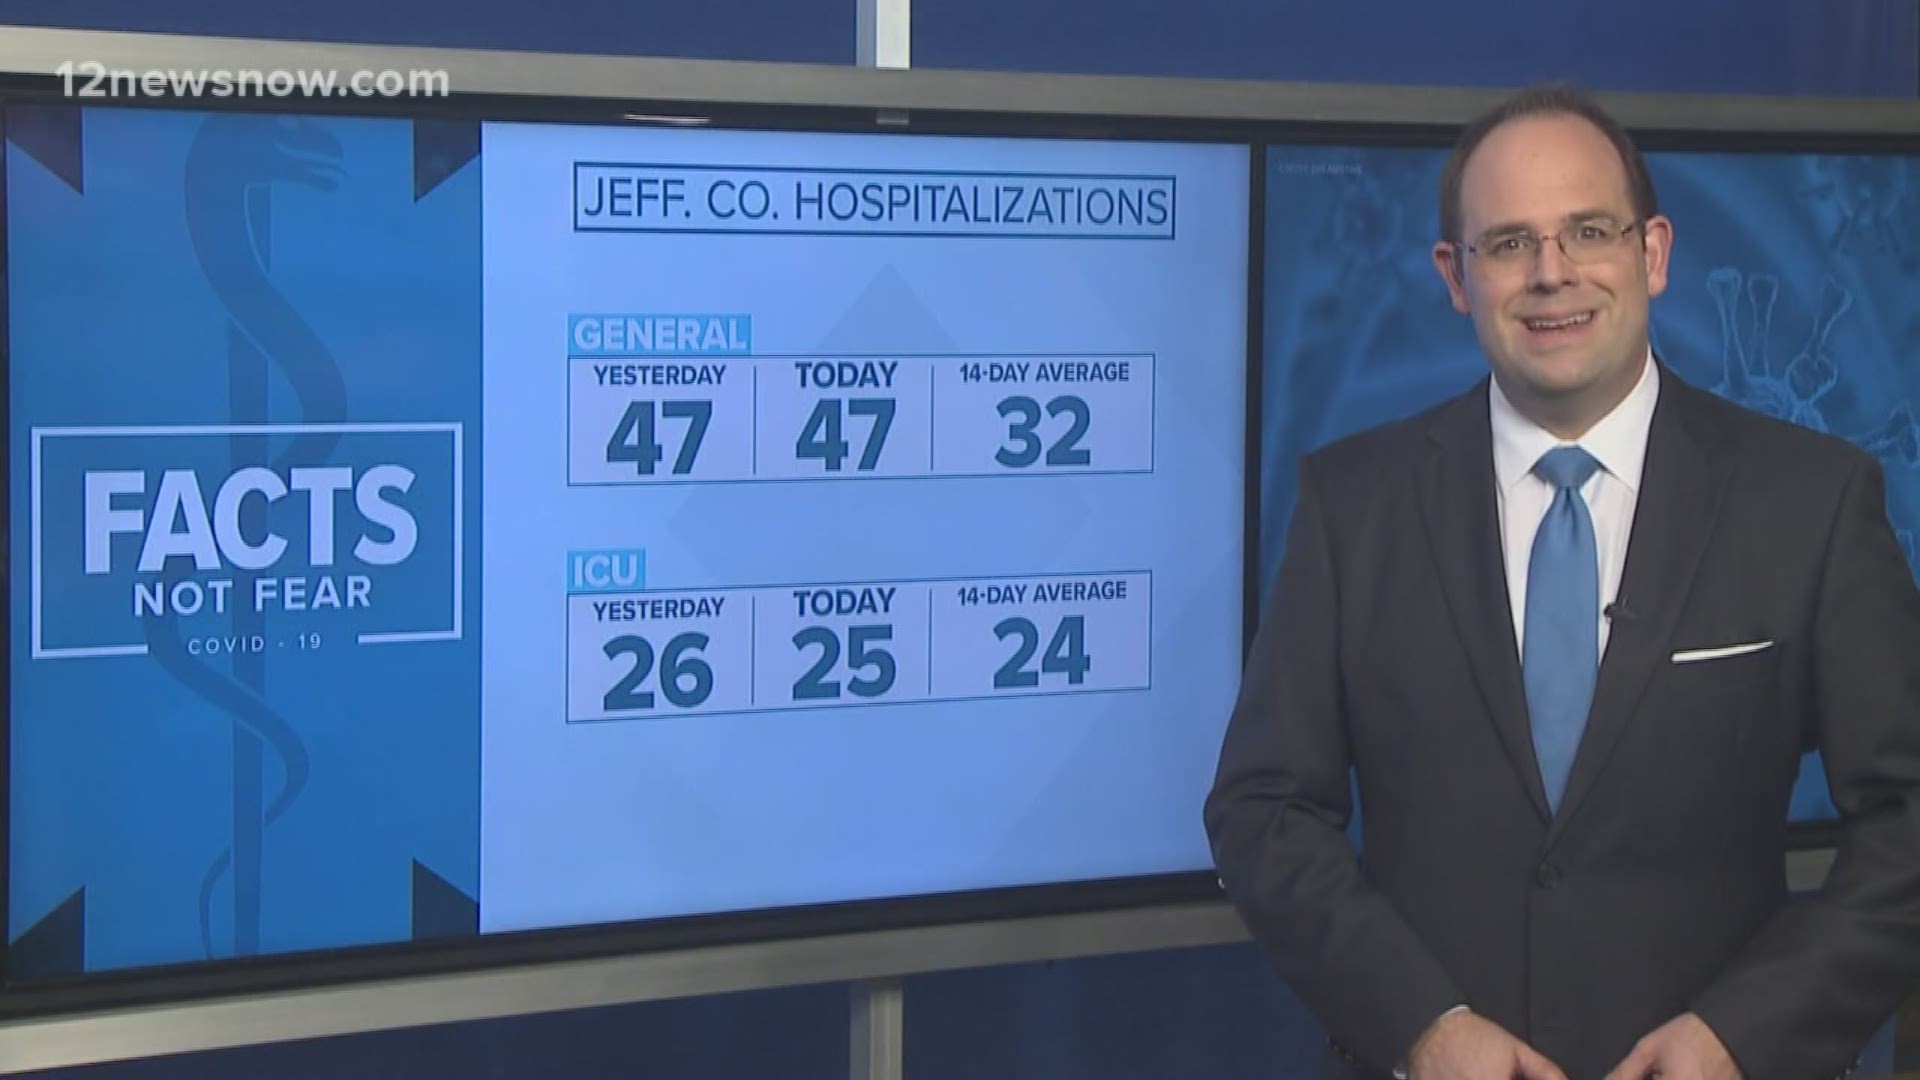 In Jefferson County, 25 COVID-19 patients are in ICU